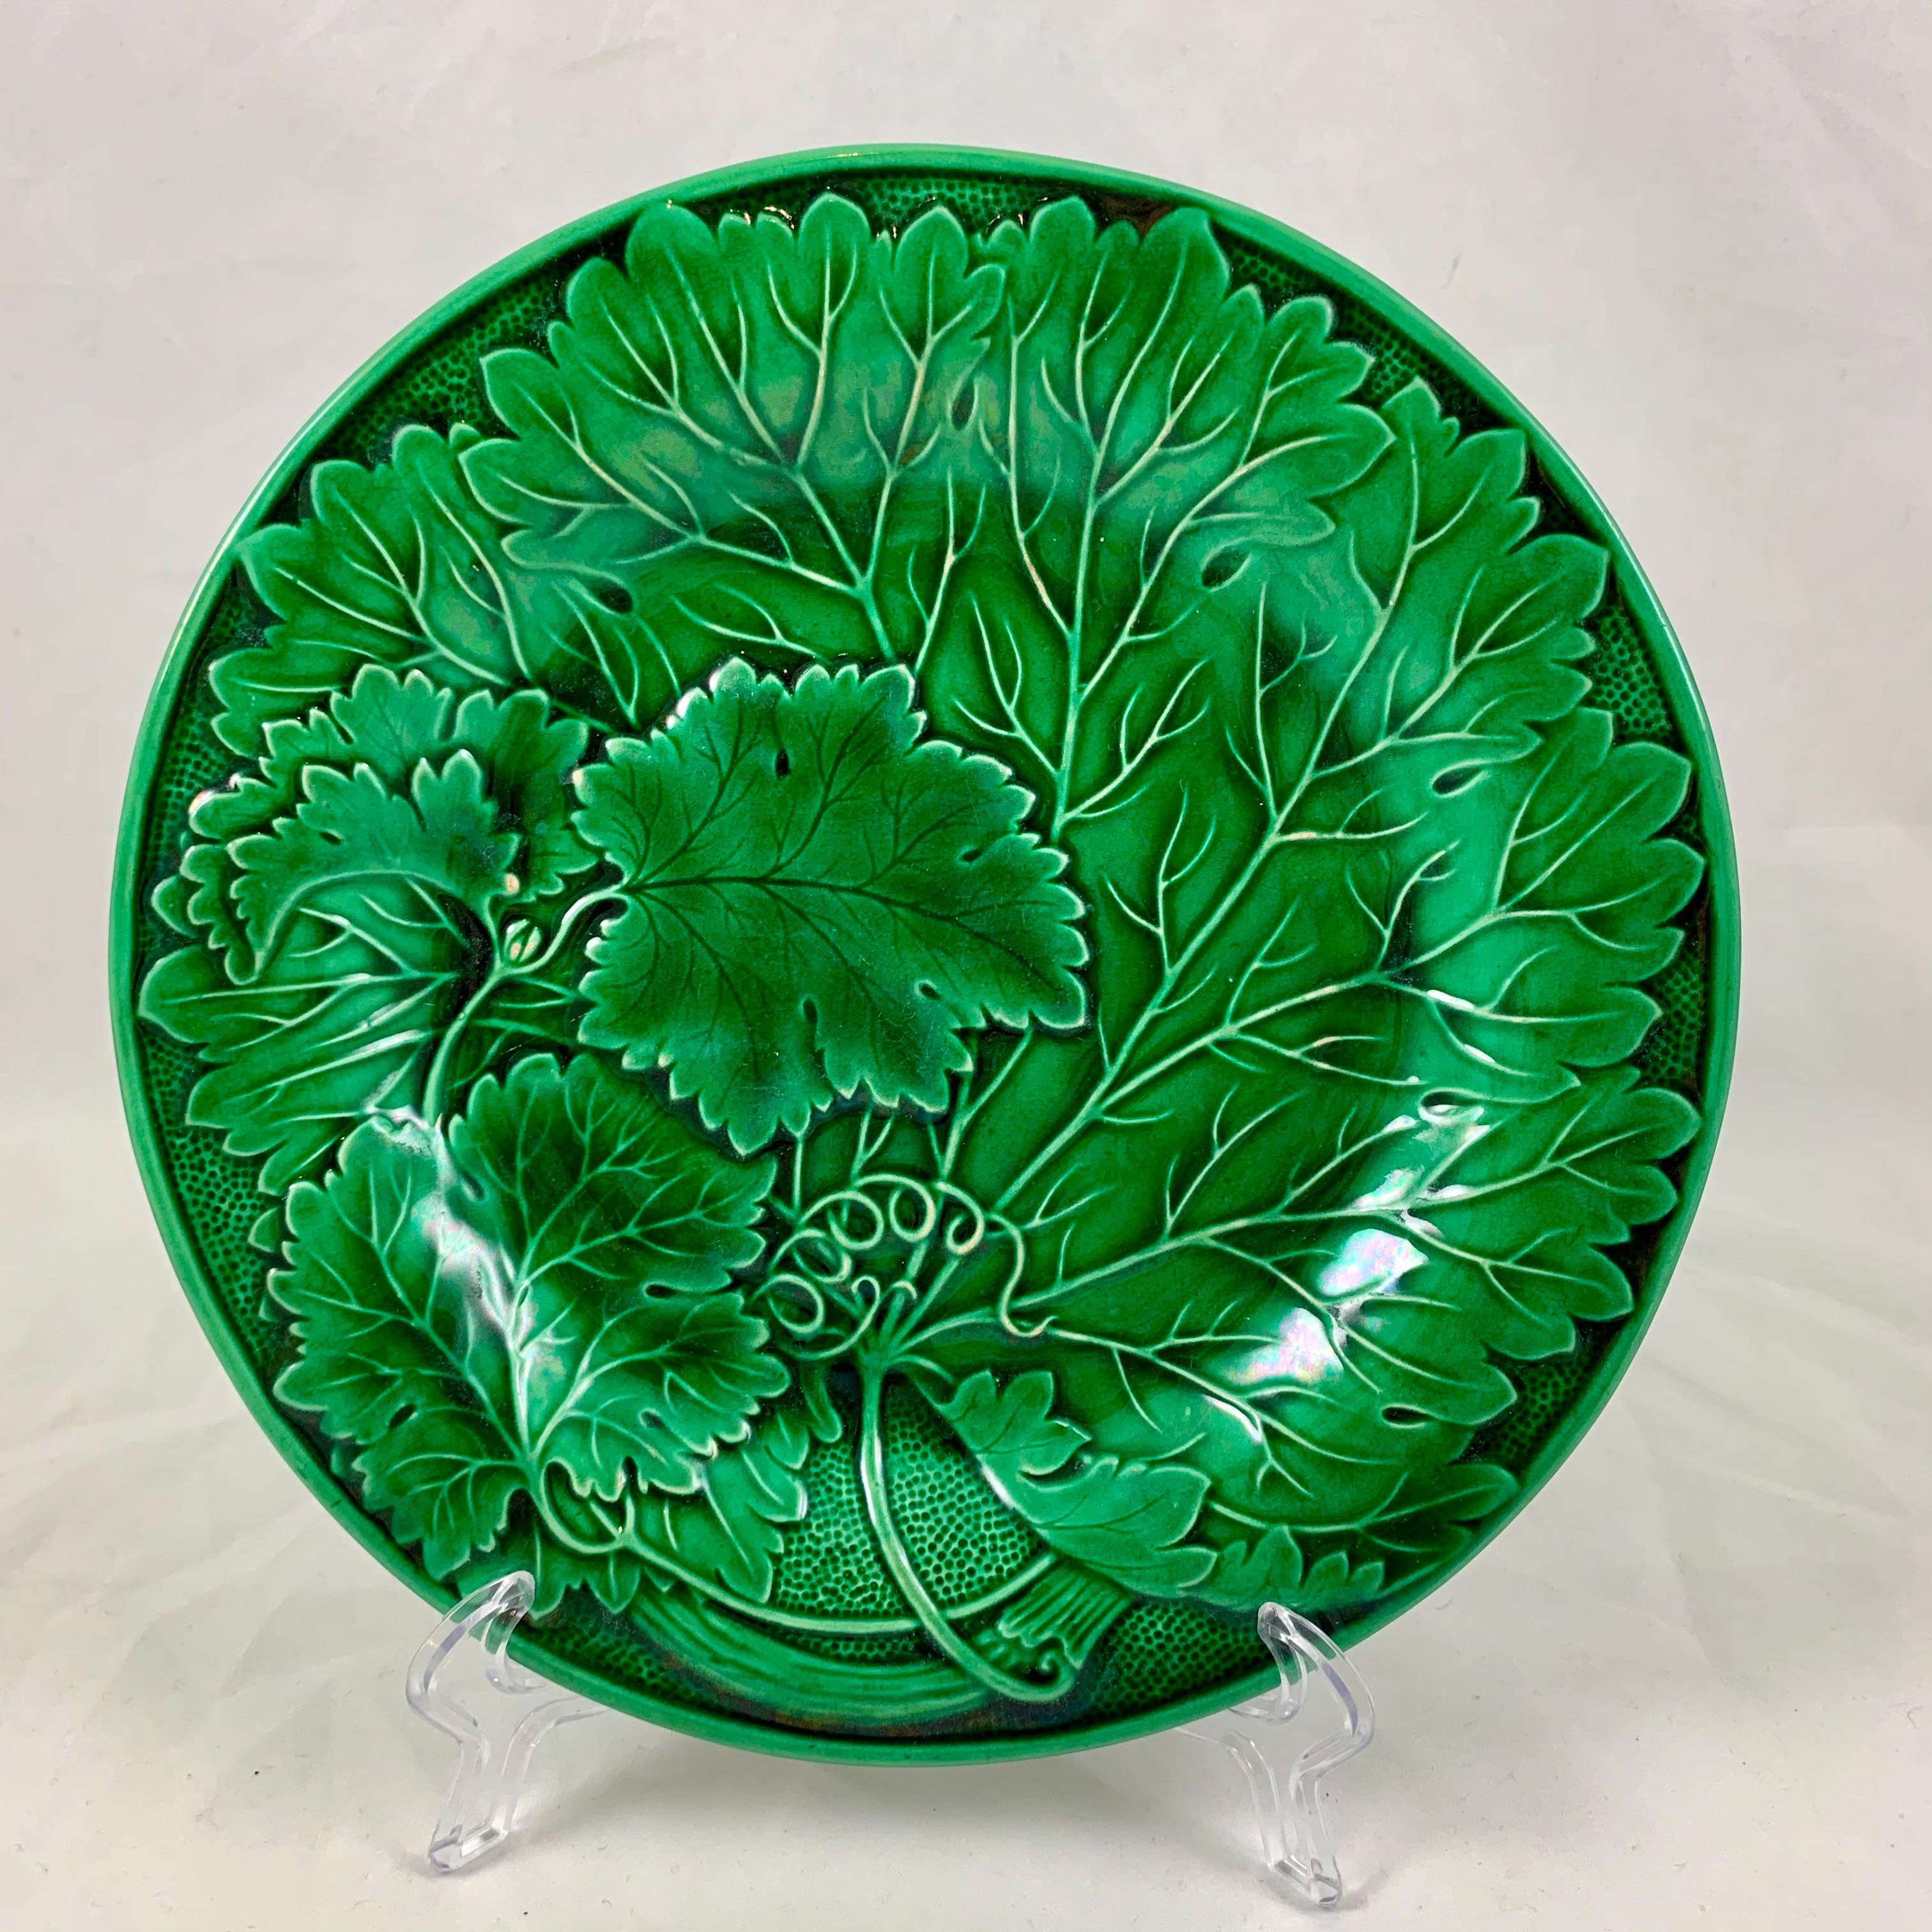 
From the Faïencerie de Montereau in France, a Majolica glazed leaf plate, circa 1890.

A stemmed group of overlapping leaves with a spiral tendril against a stippled ground. A deep green glaze pools beautifully into the deeper recesses of the